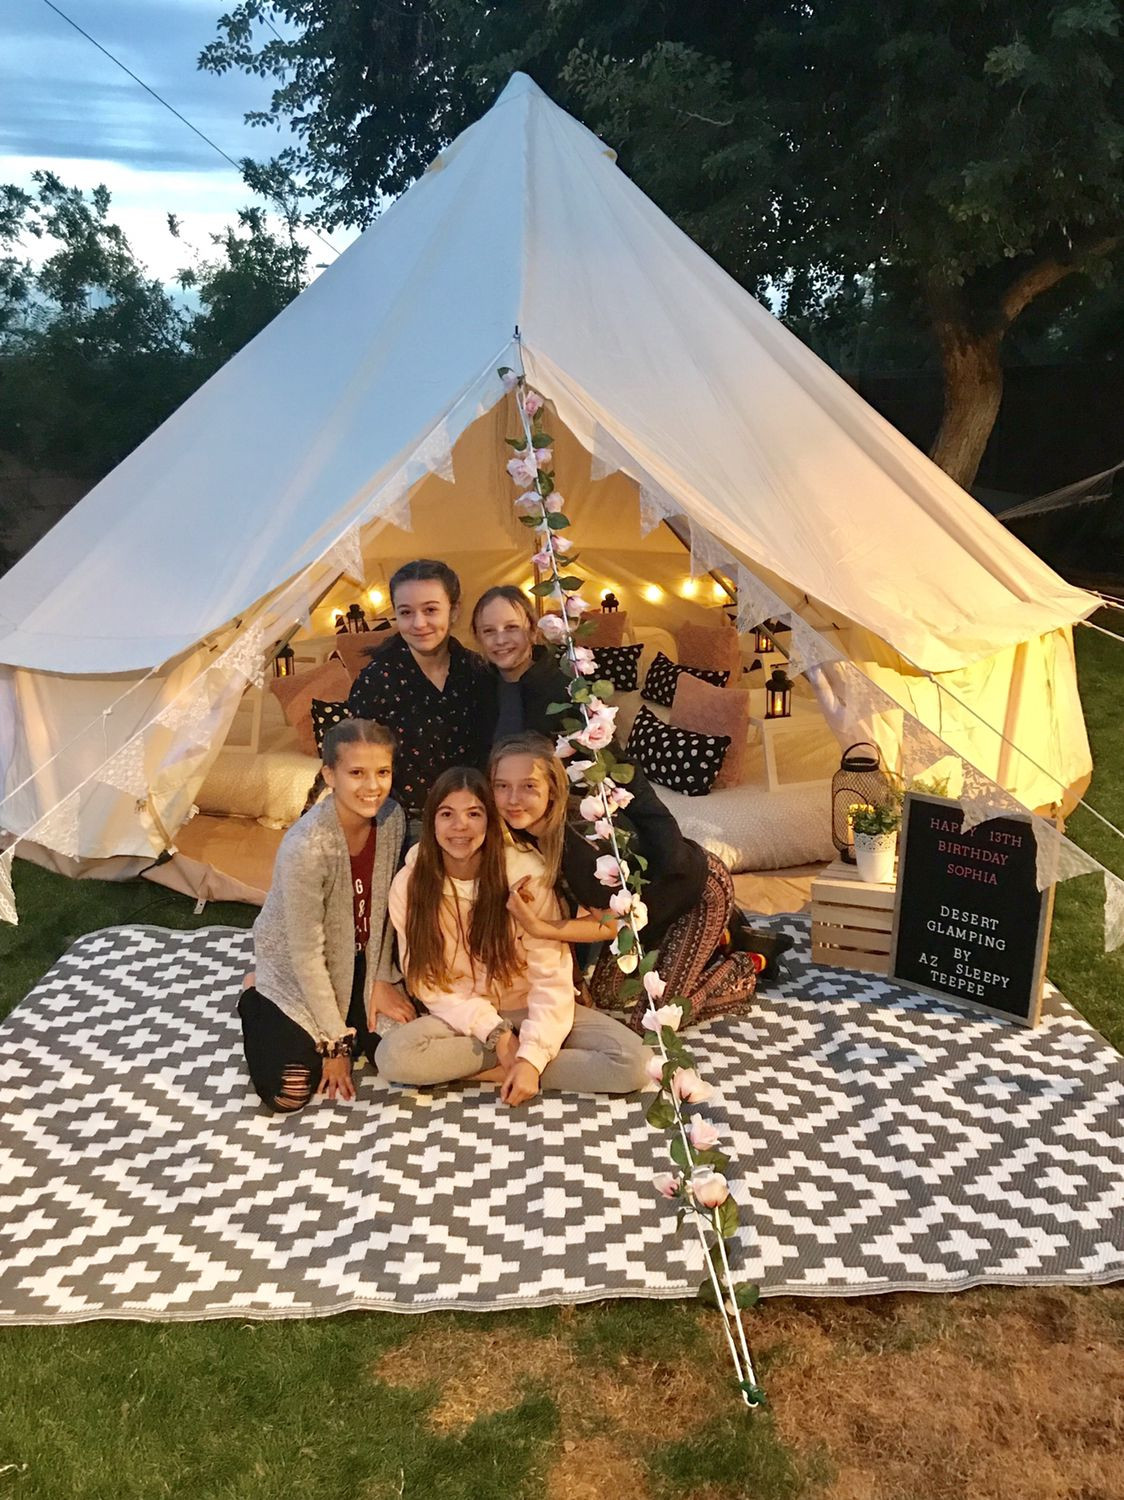 Backyard Tent Party Ideas
 Go glamping in your backyard for the coolest Sleepover